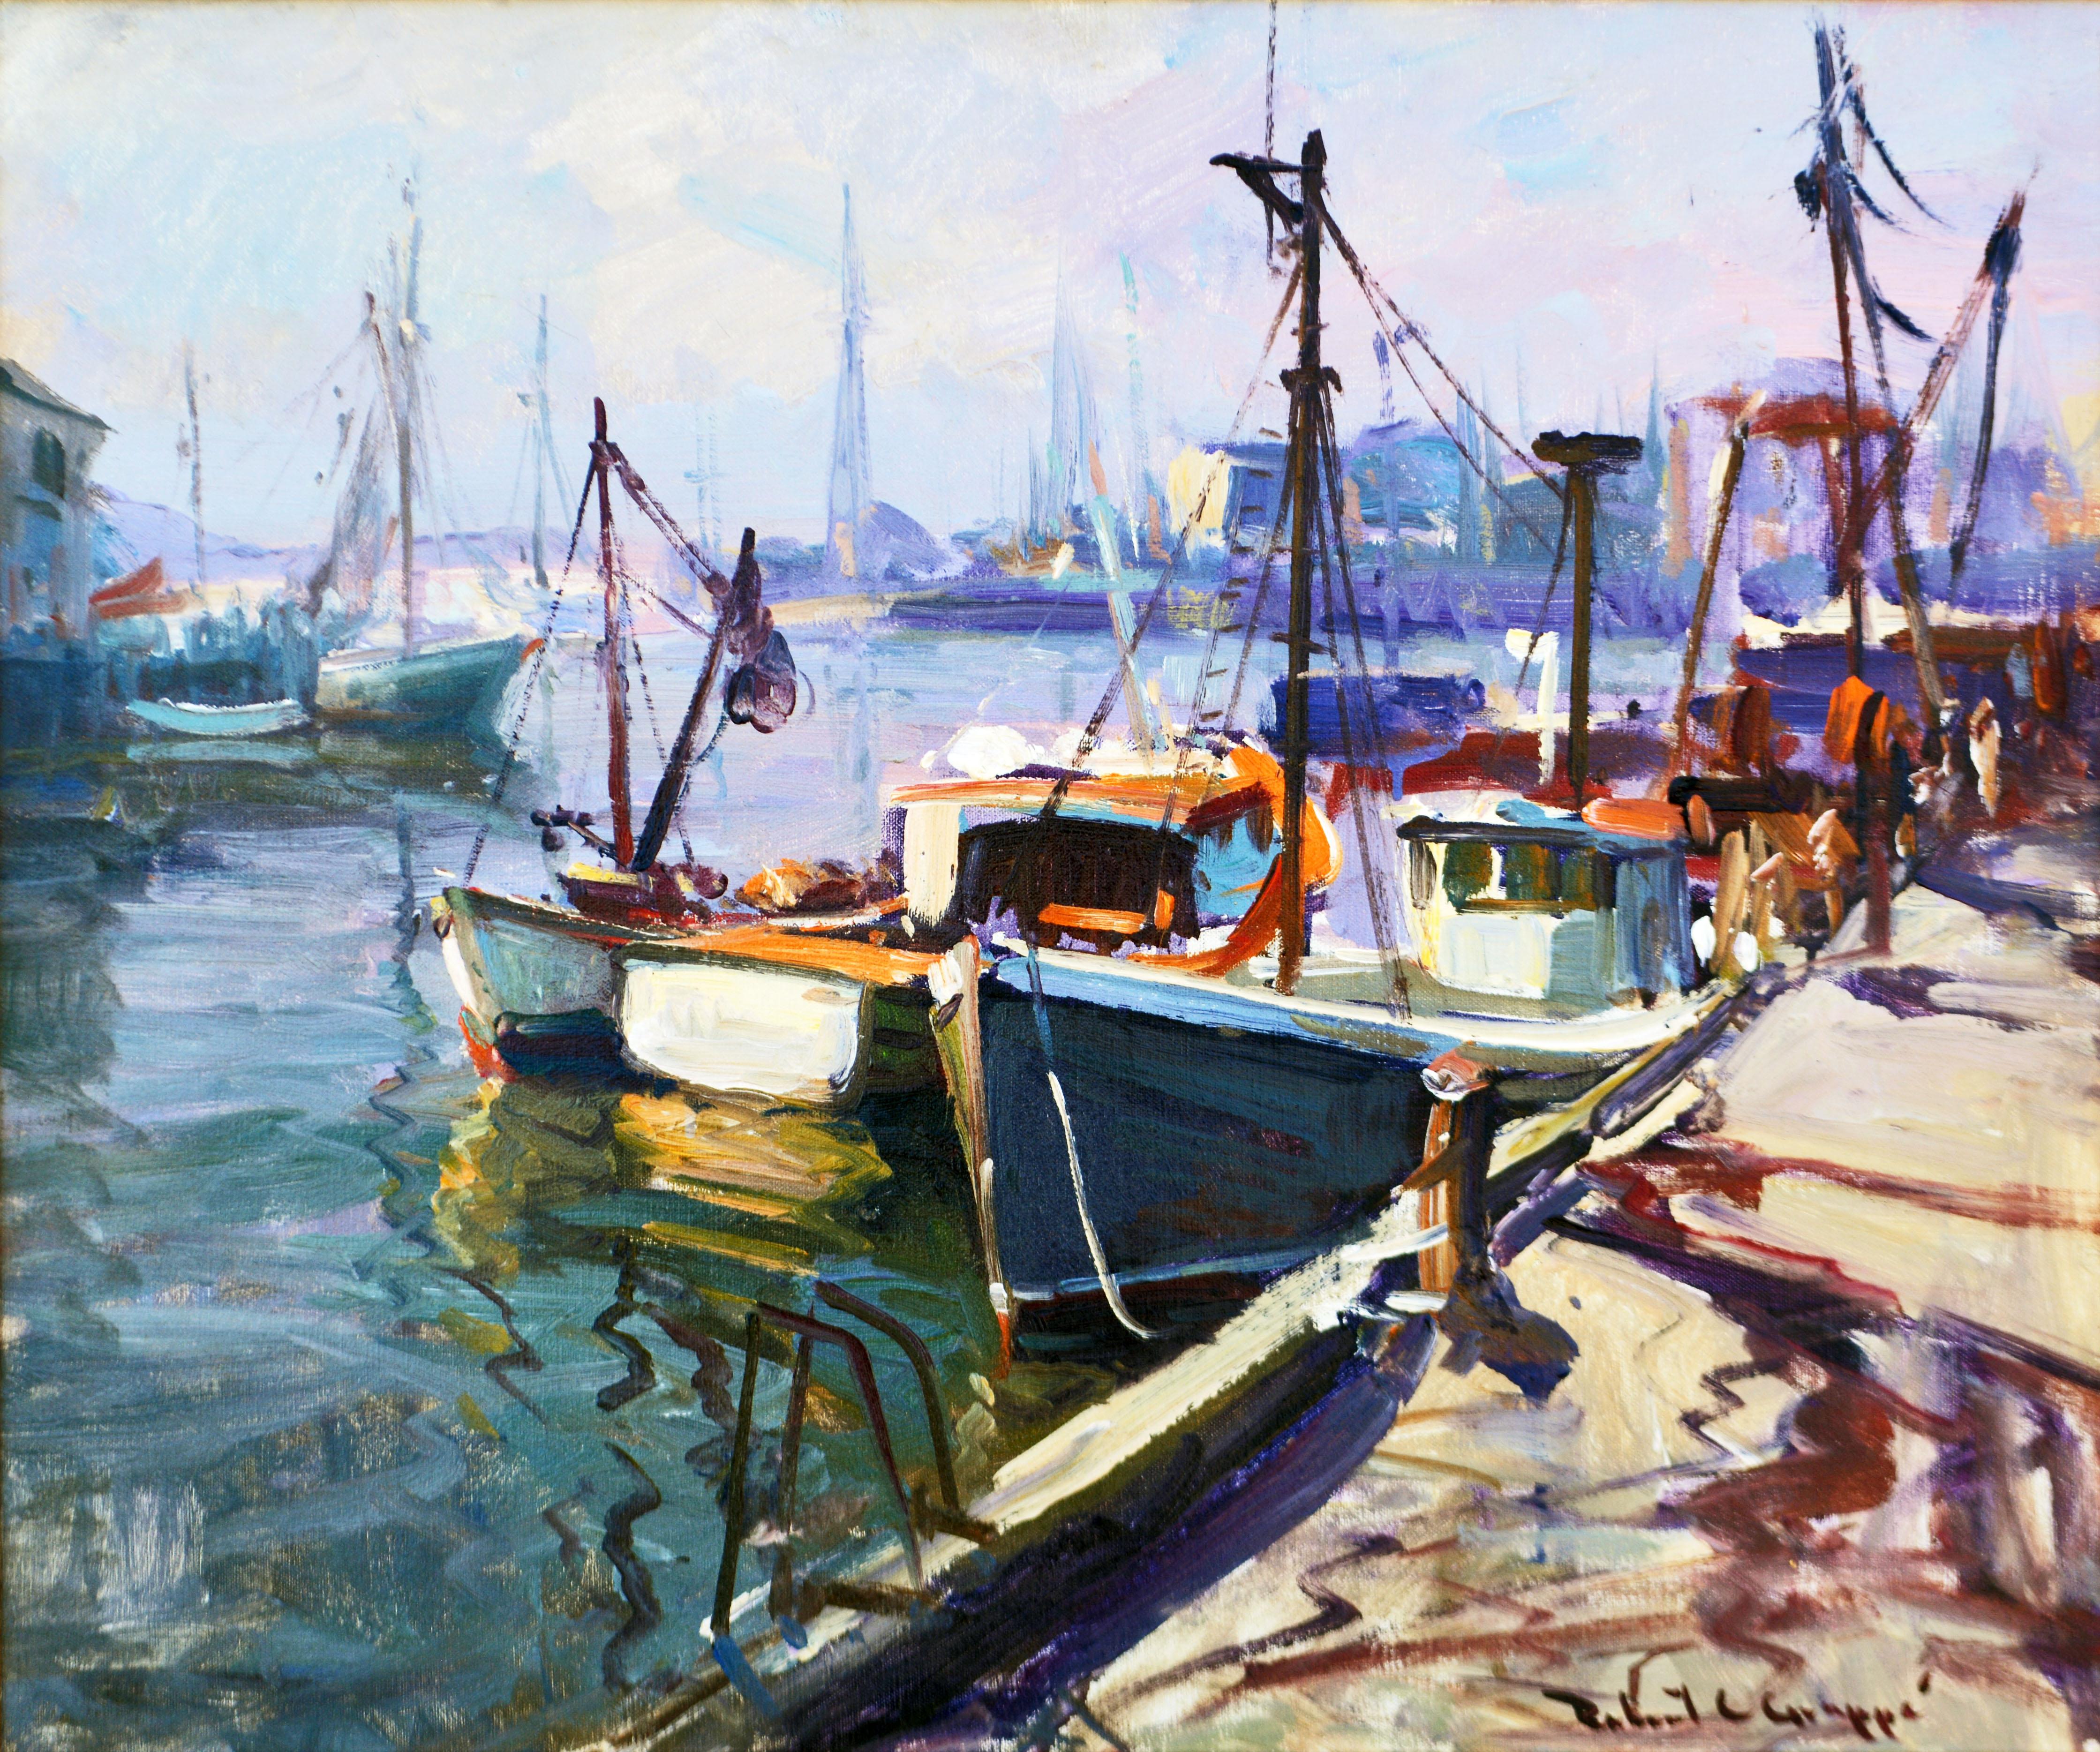 This bold impressionist style painting by renowned Cape Ann artist Robert C. Gruppe features a moment of light and color along the quayside of old Gloucester harbor where the lobster boats are traditionally docked. With vibrant color and vigorous